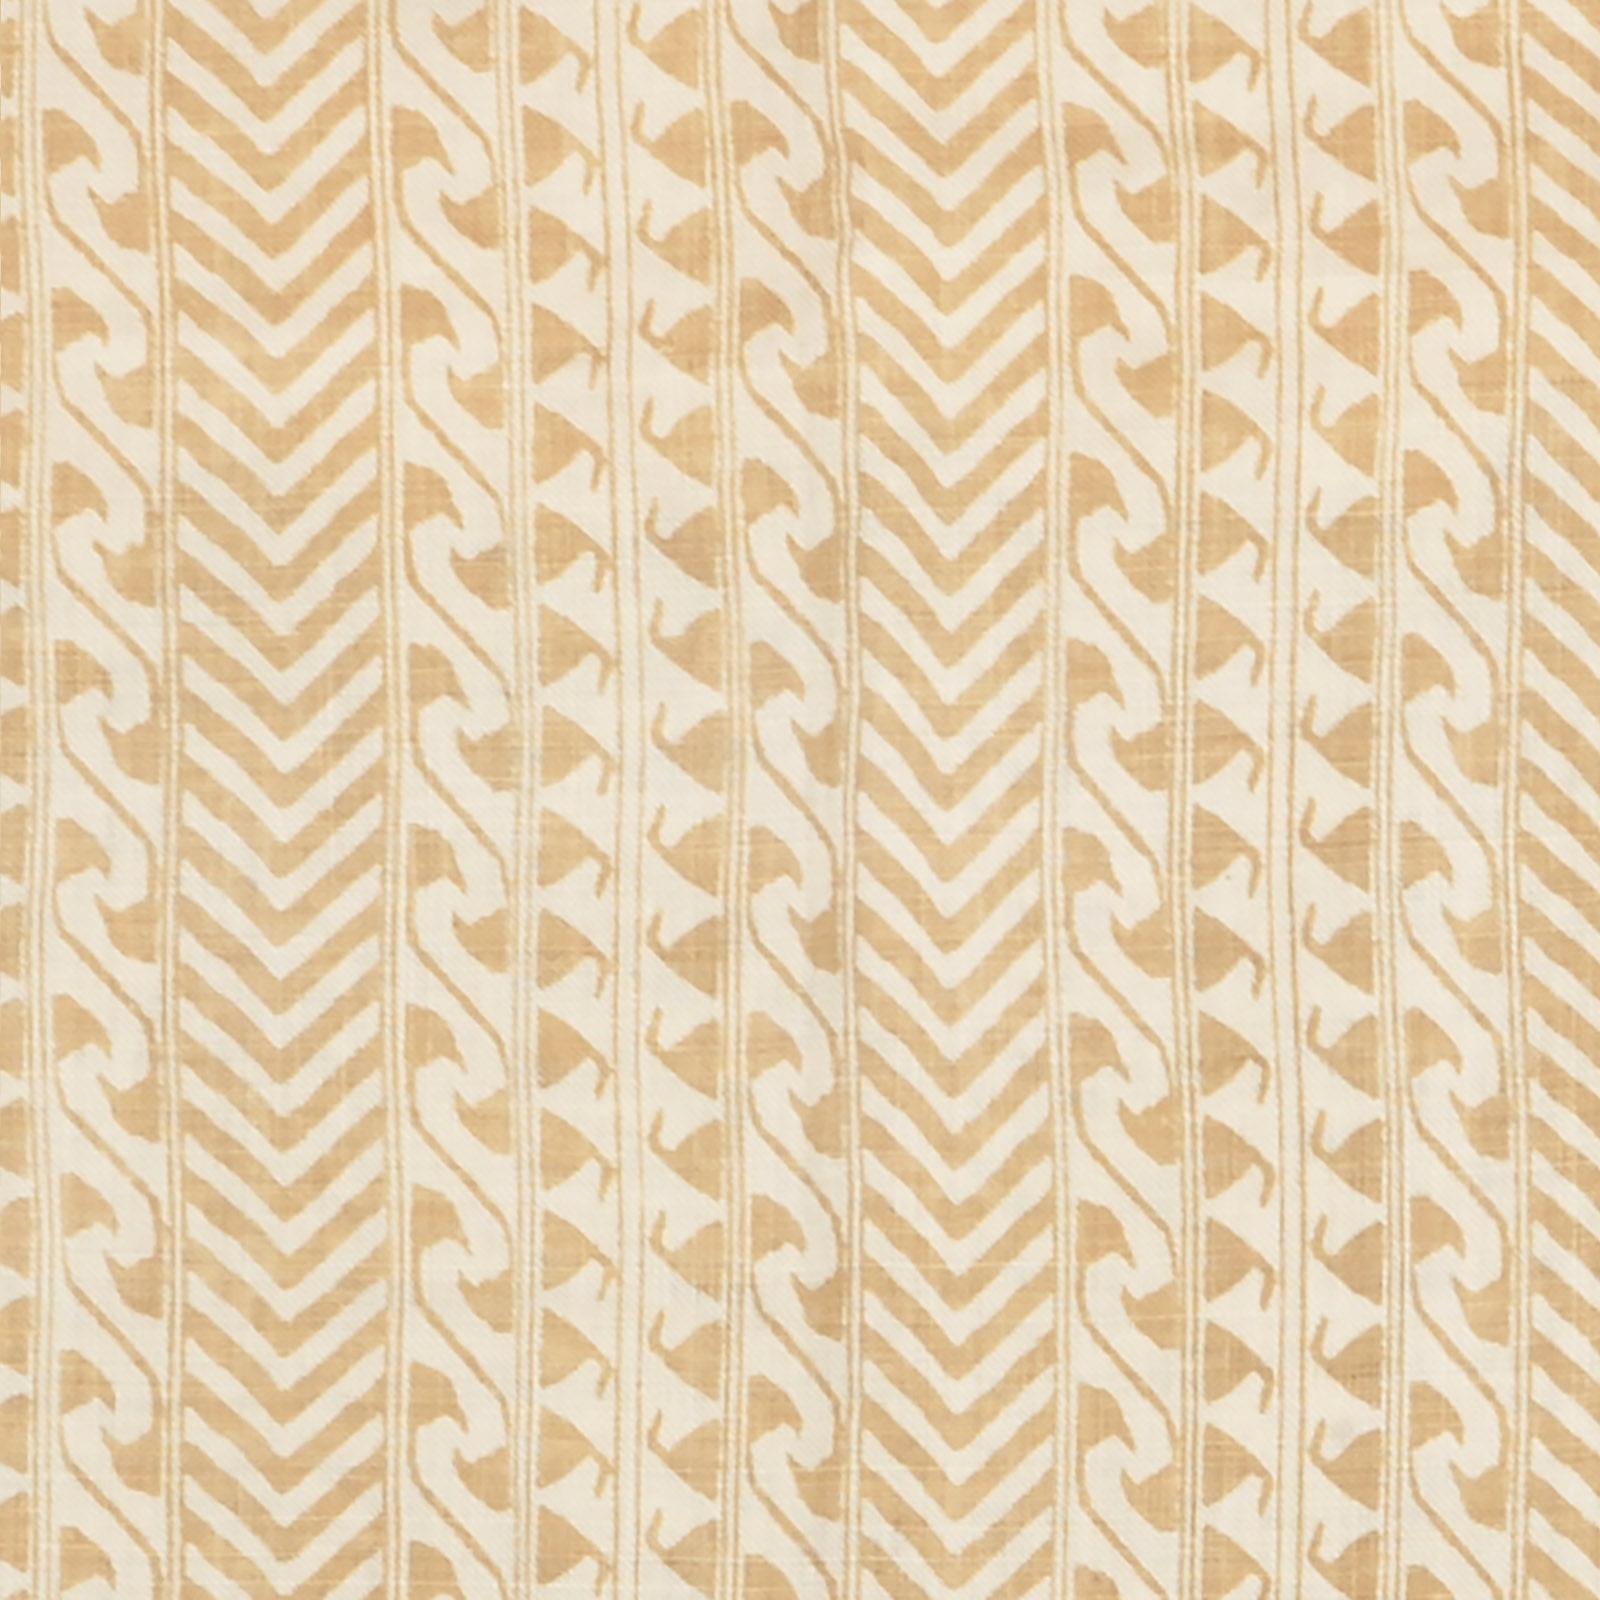 Image may contain Home Decor Rug Linen and Texture